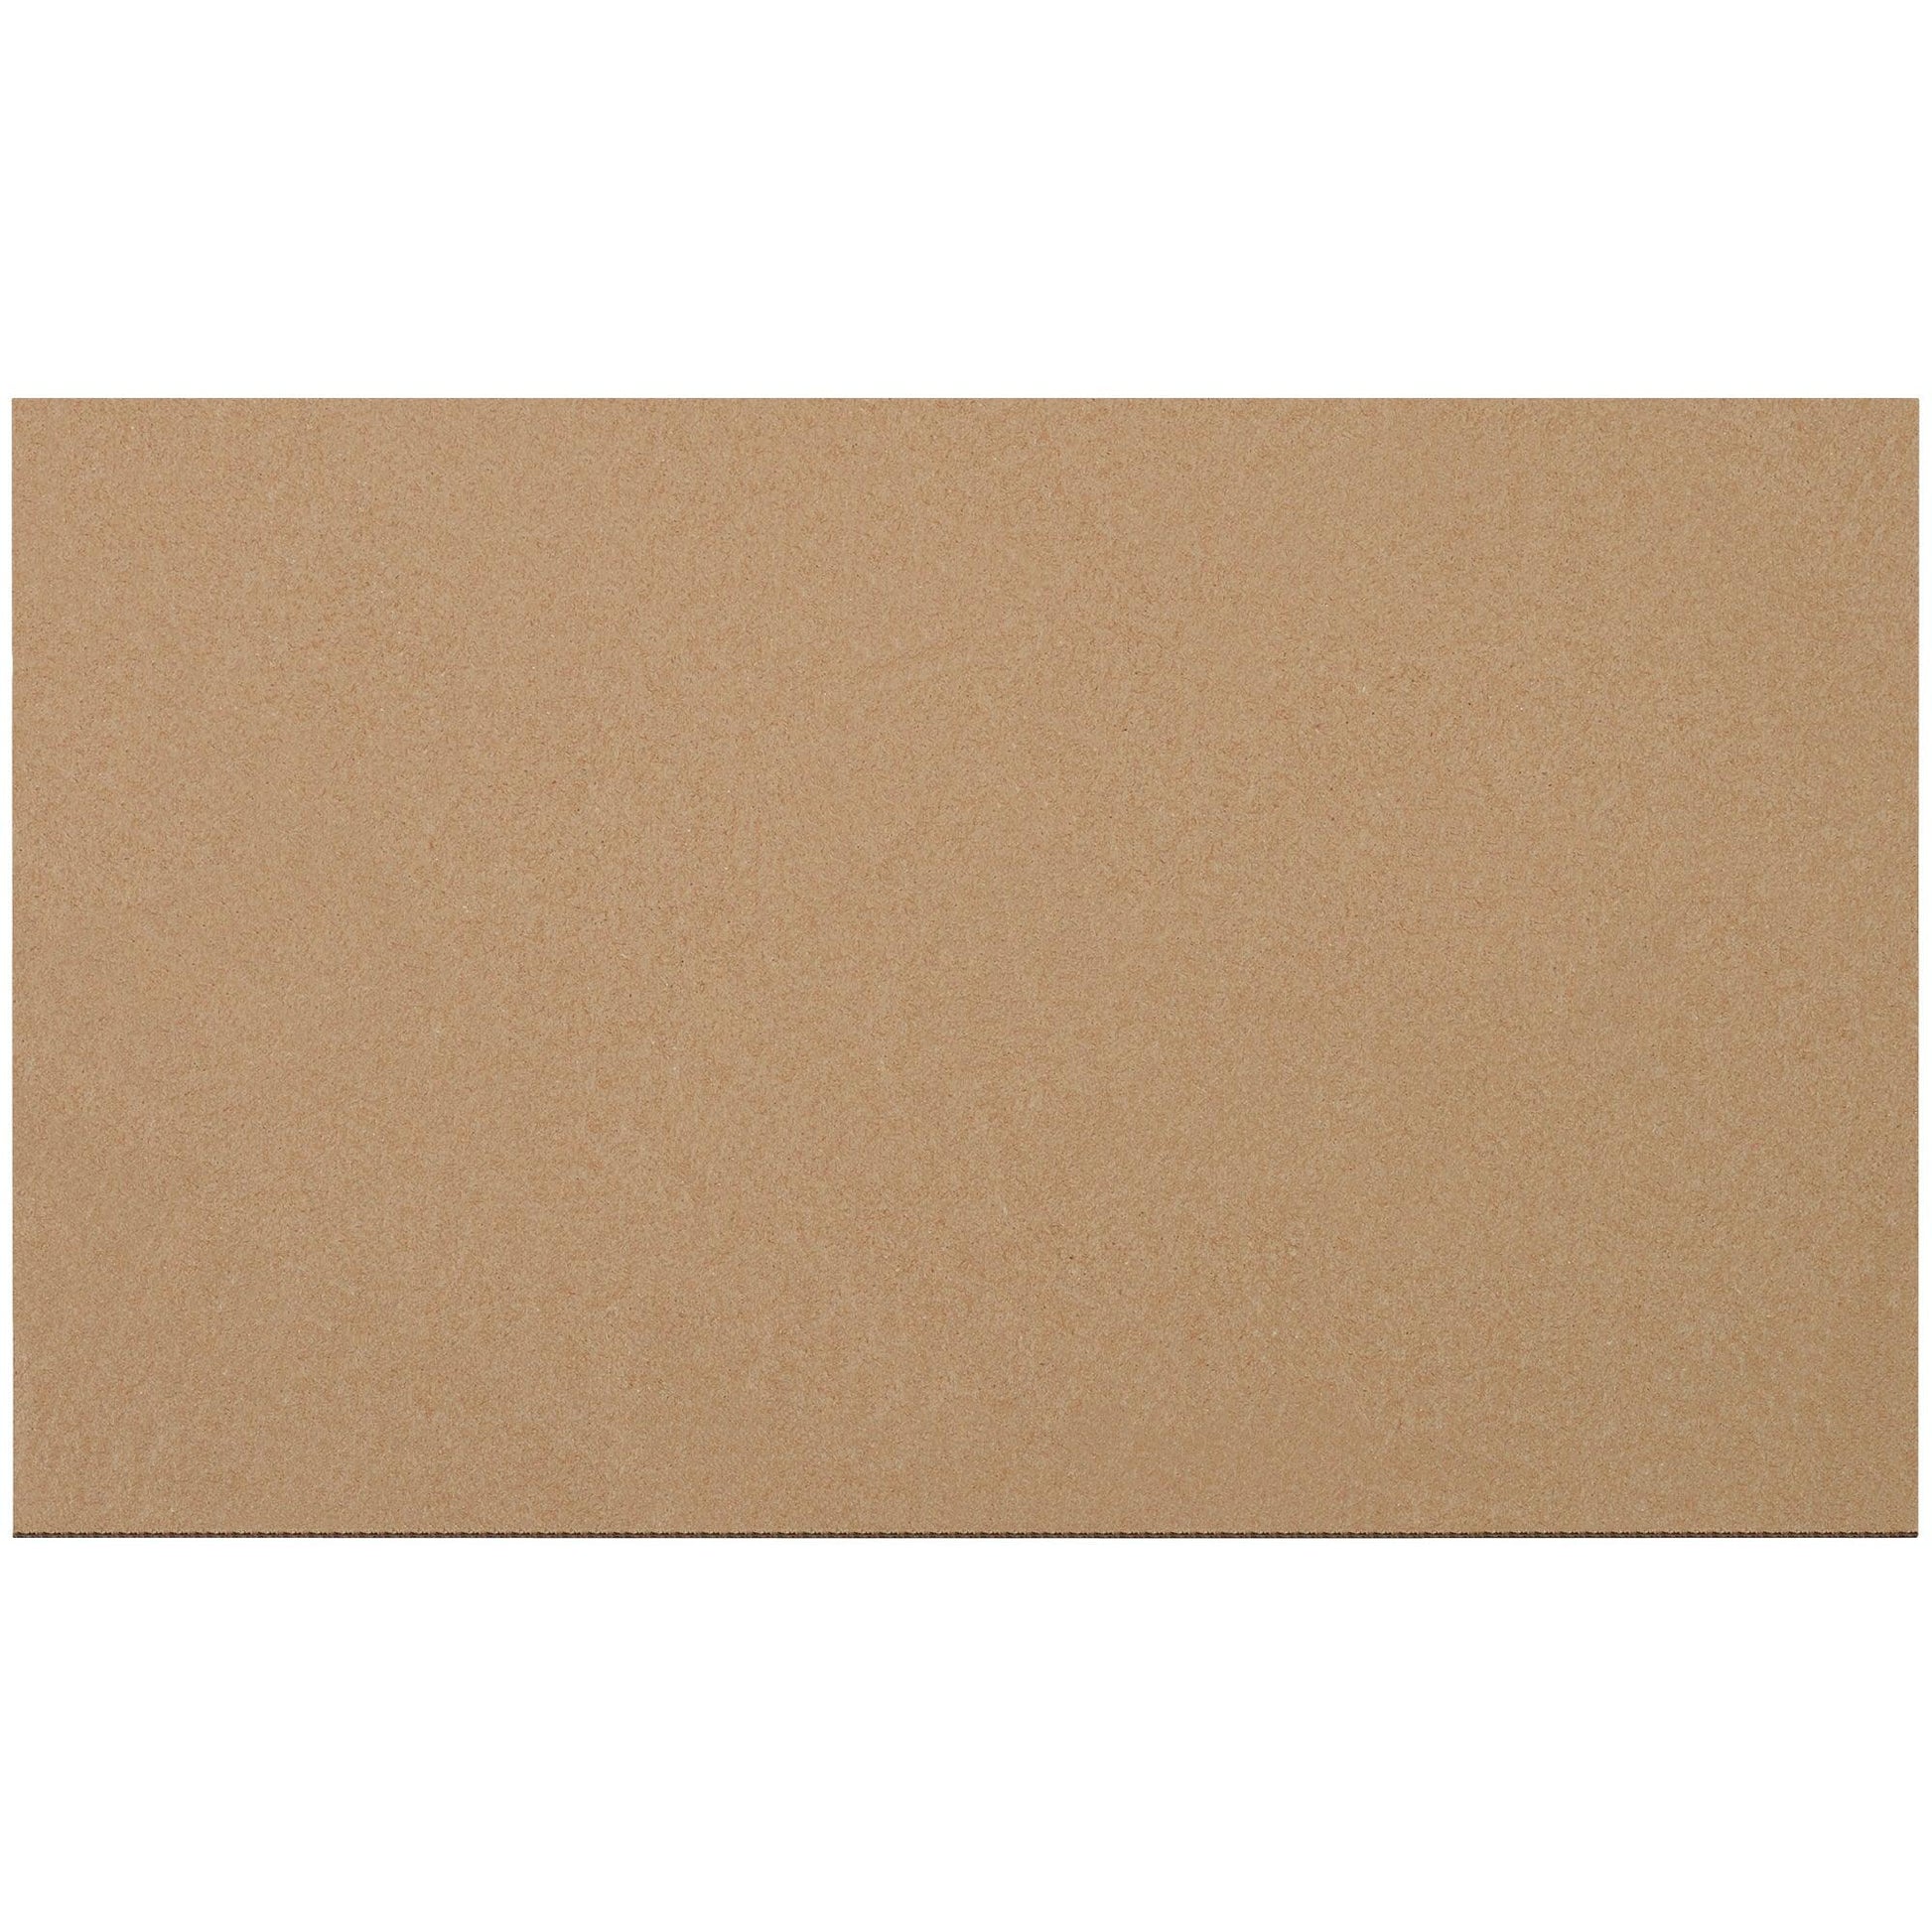 11 7/8 x 19 7/8" Corrugated Layer Pads - SP1119